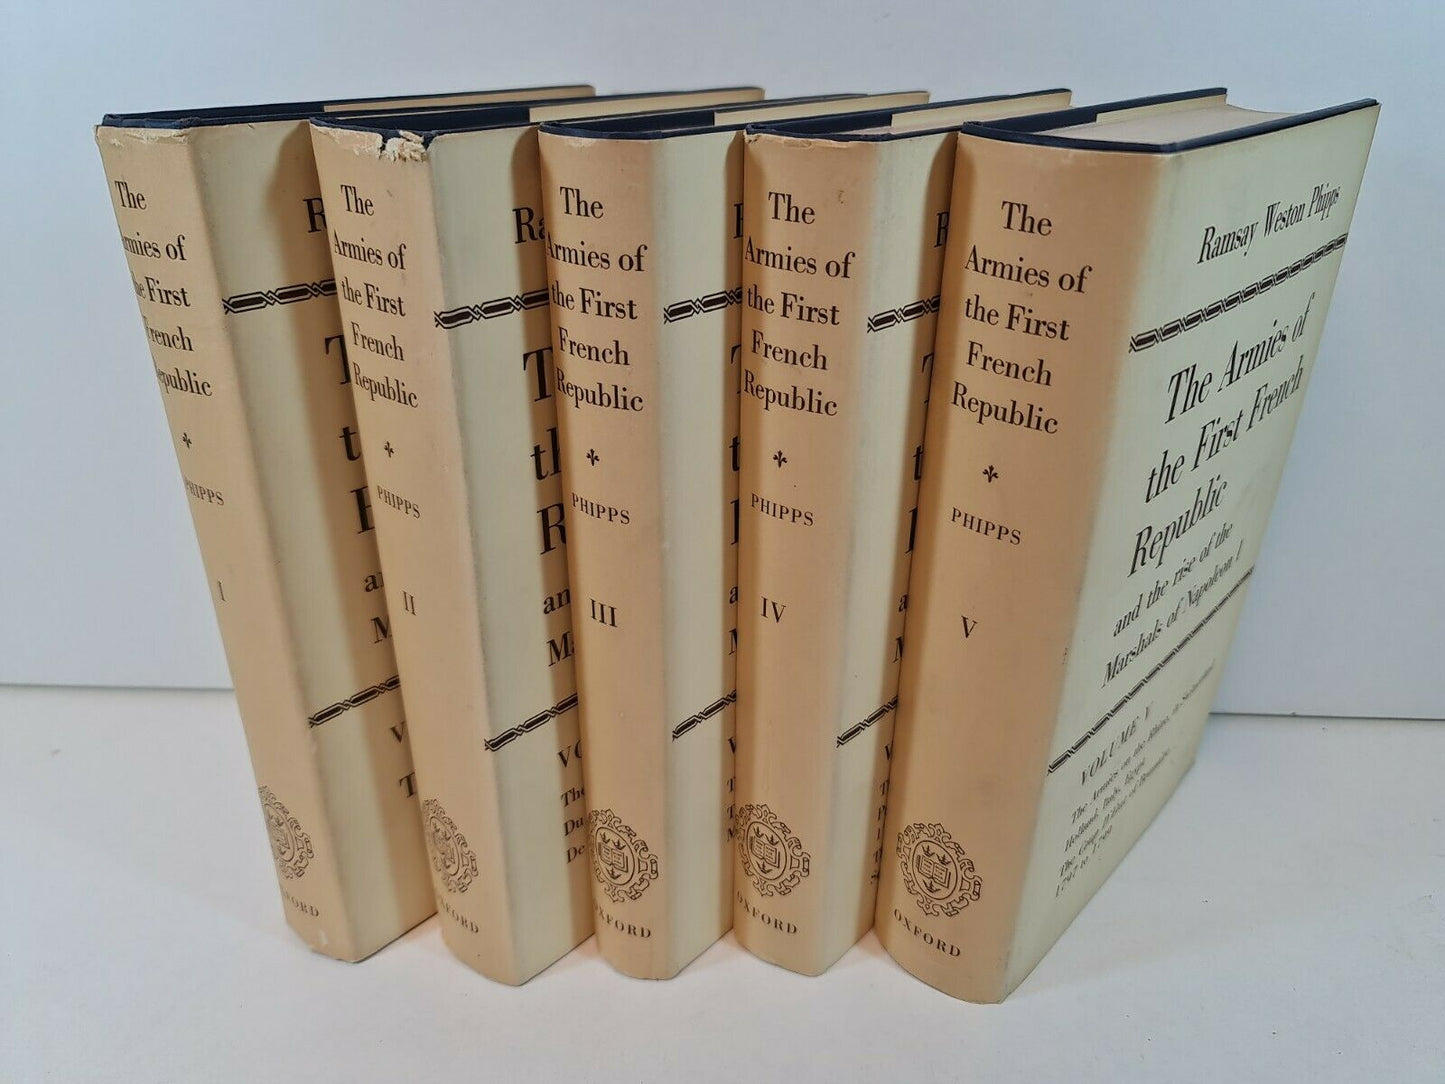 The Armies of the First French Republic Vol 1-5 by R.W. Phipps